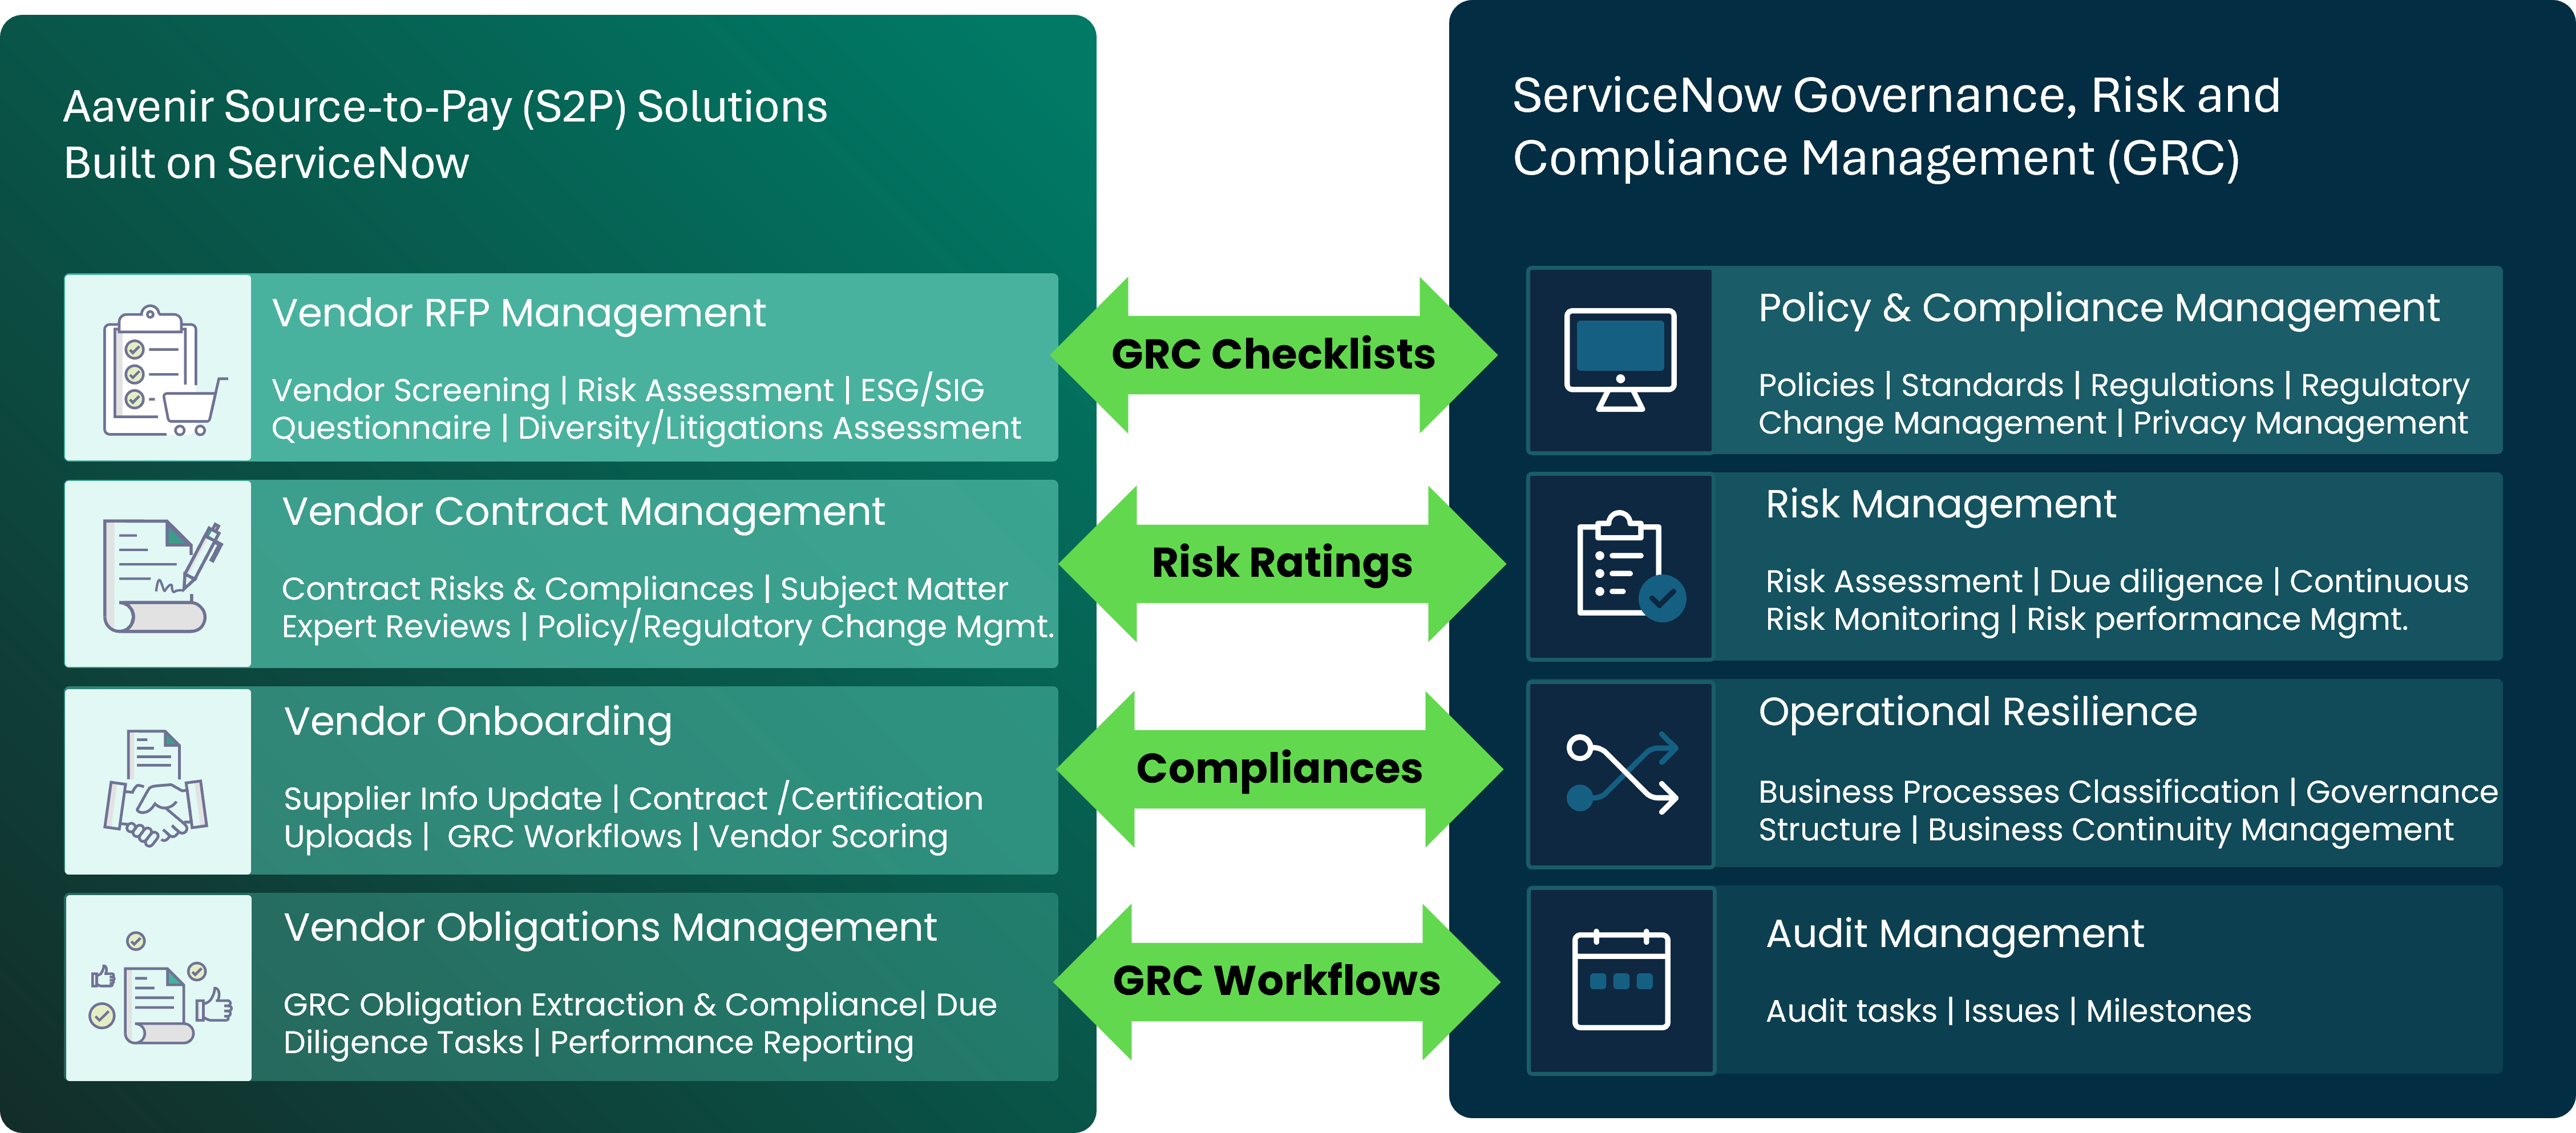 Vendor Risk and Compliance Management with Aavenir Source to Pay Solutions and ServiceNow GRC Integration Architecture